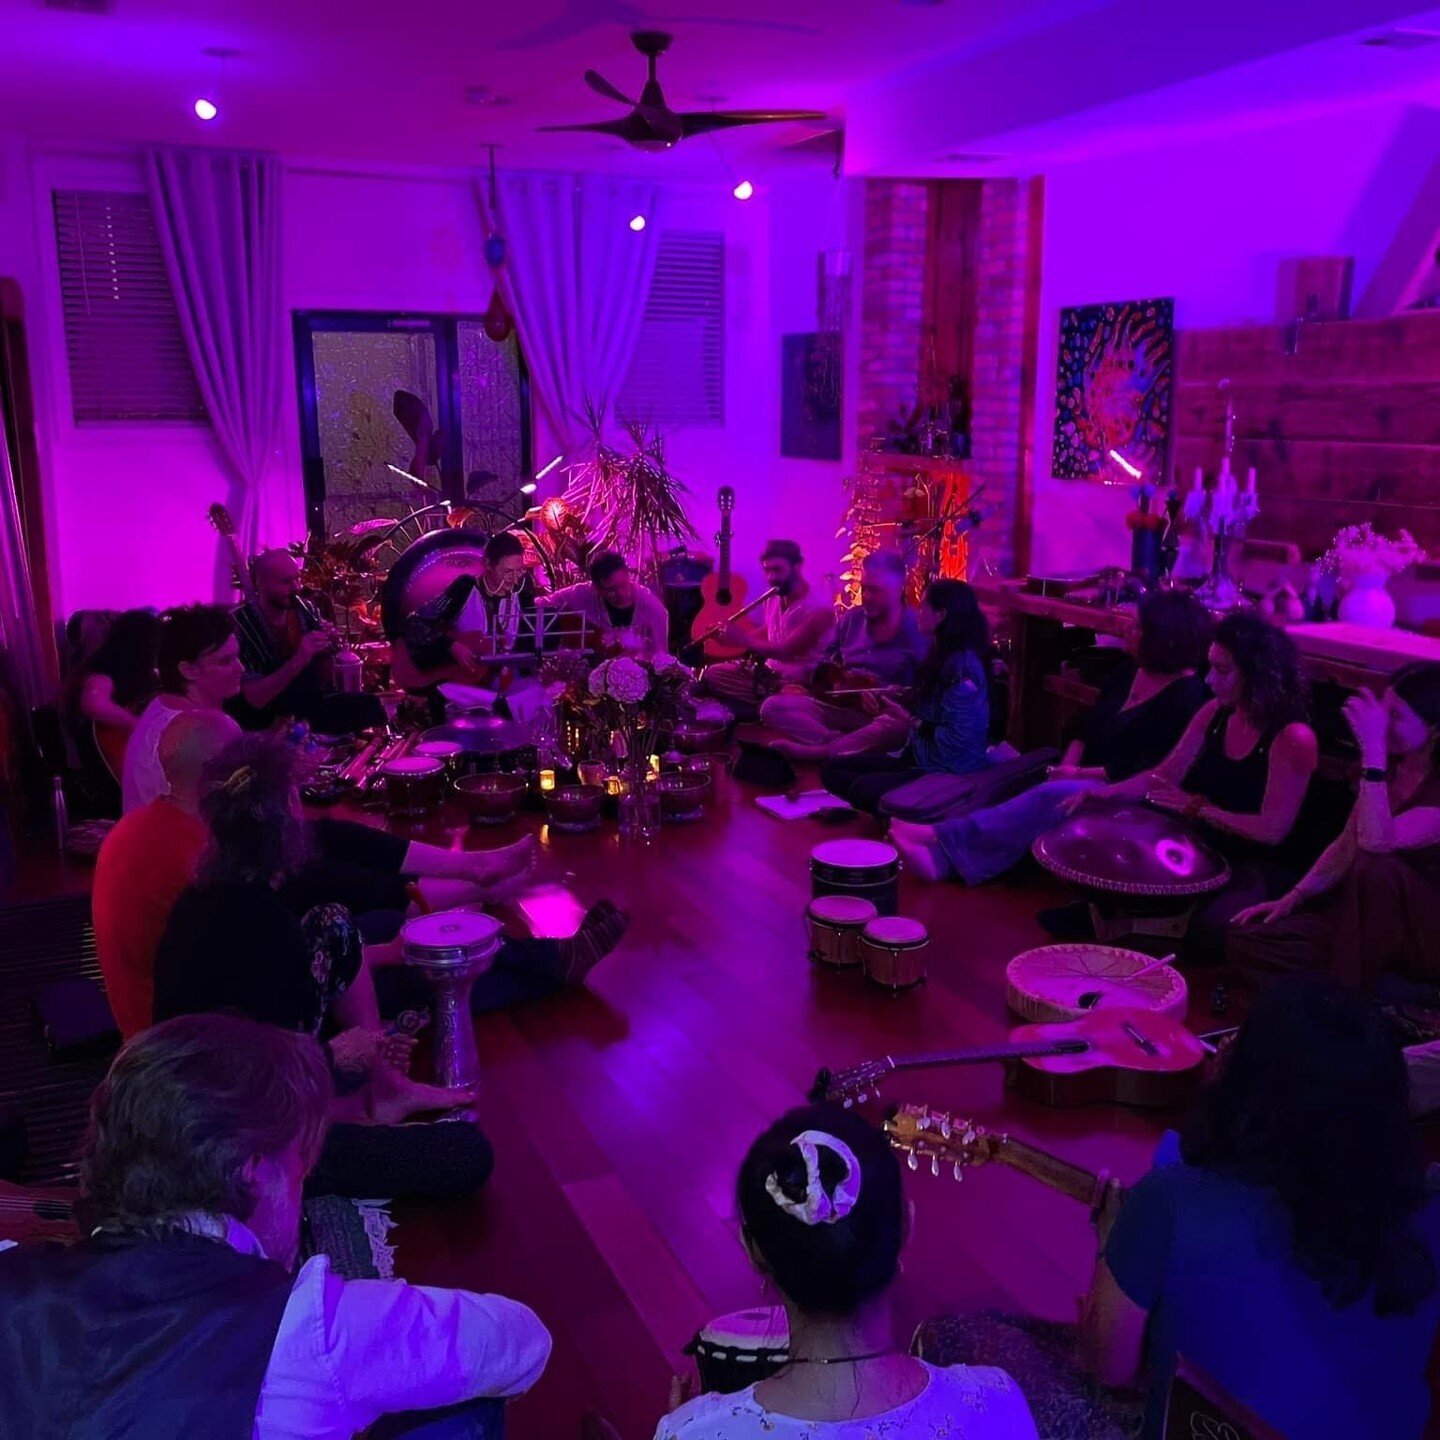 When we gather like this, magic happens! Come join us for a night of sharing of medicine songs, chants, and sacred incantations from around the world. Bring your voices, instruments, and your open hearts ✨🌱🦋 (link in bio)
.
Our musical collaborator